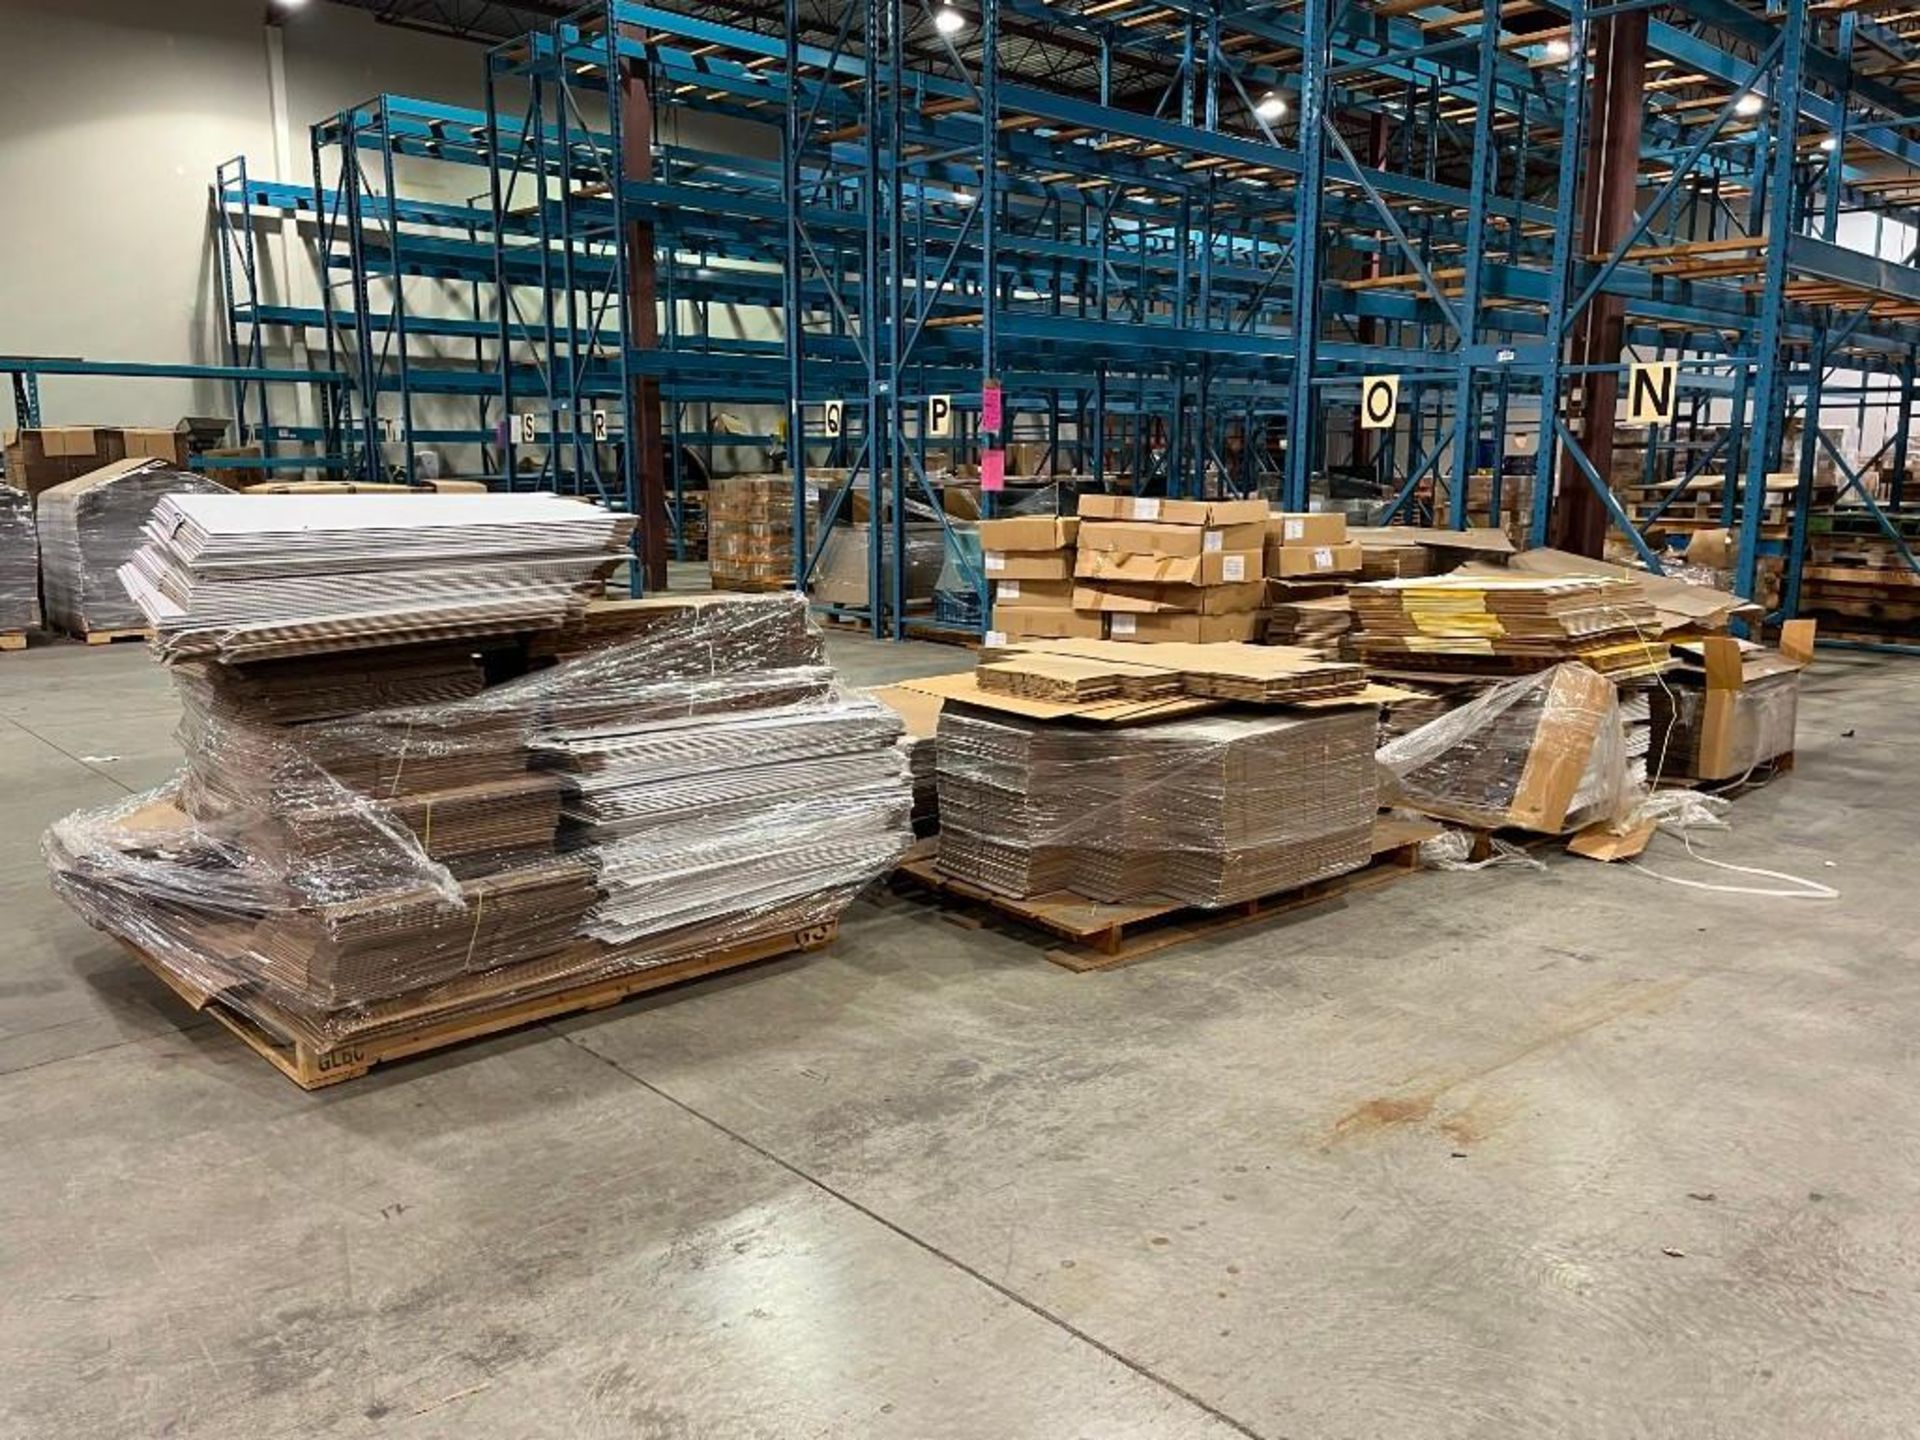 Lot of (7) Pallets Asst. Cardboard Boxes and Plastic Bags.